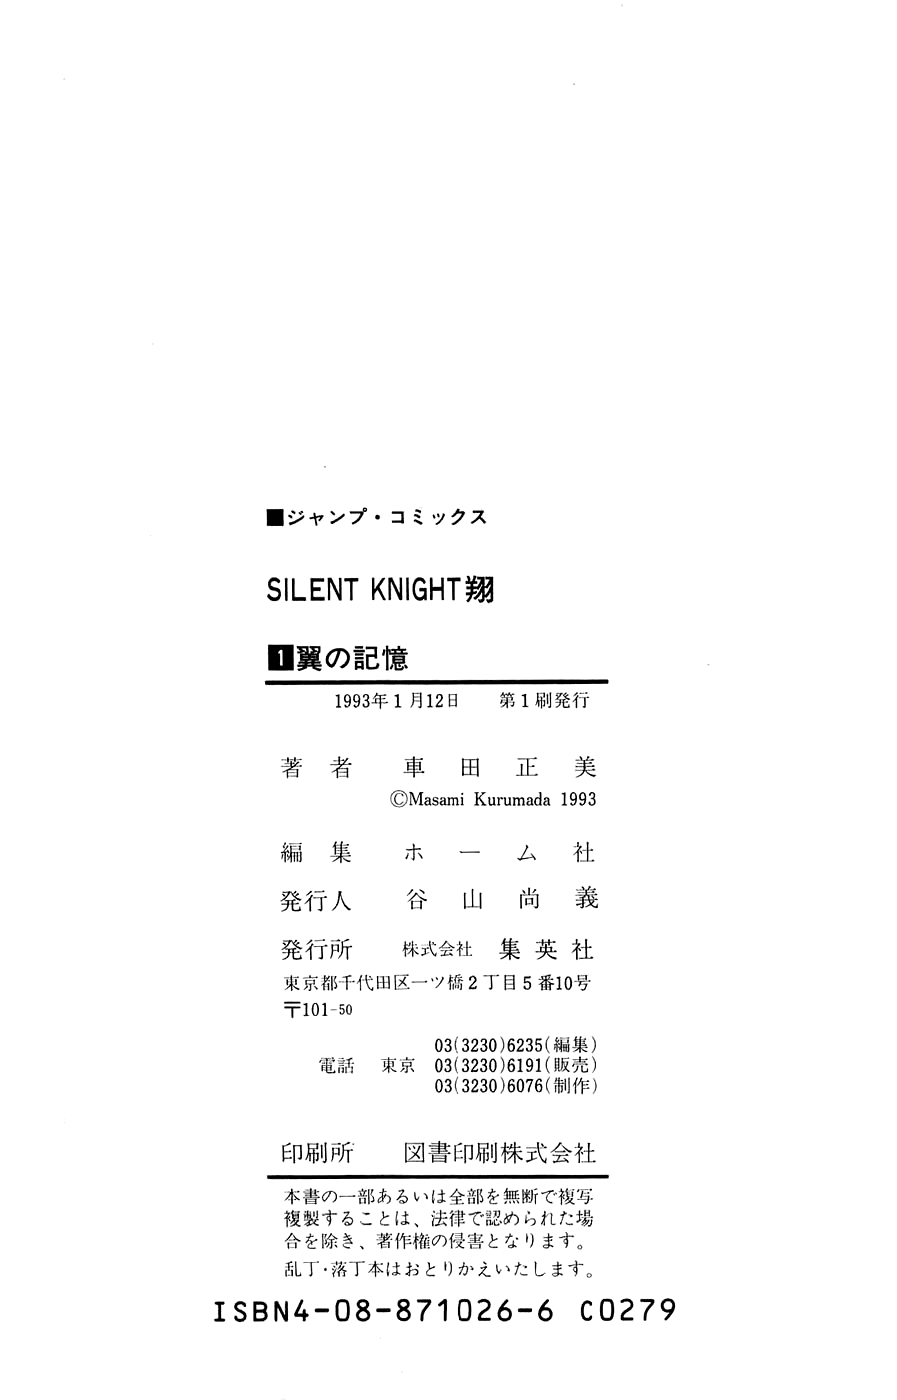 Silent Knight Sho Vol. 1 Ch. 4 The Dreadful Proof of Loyalty